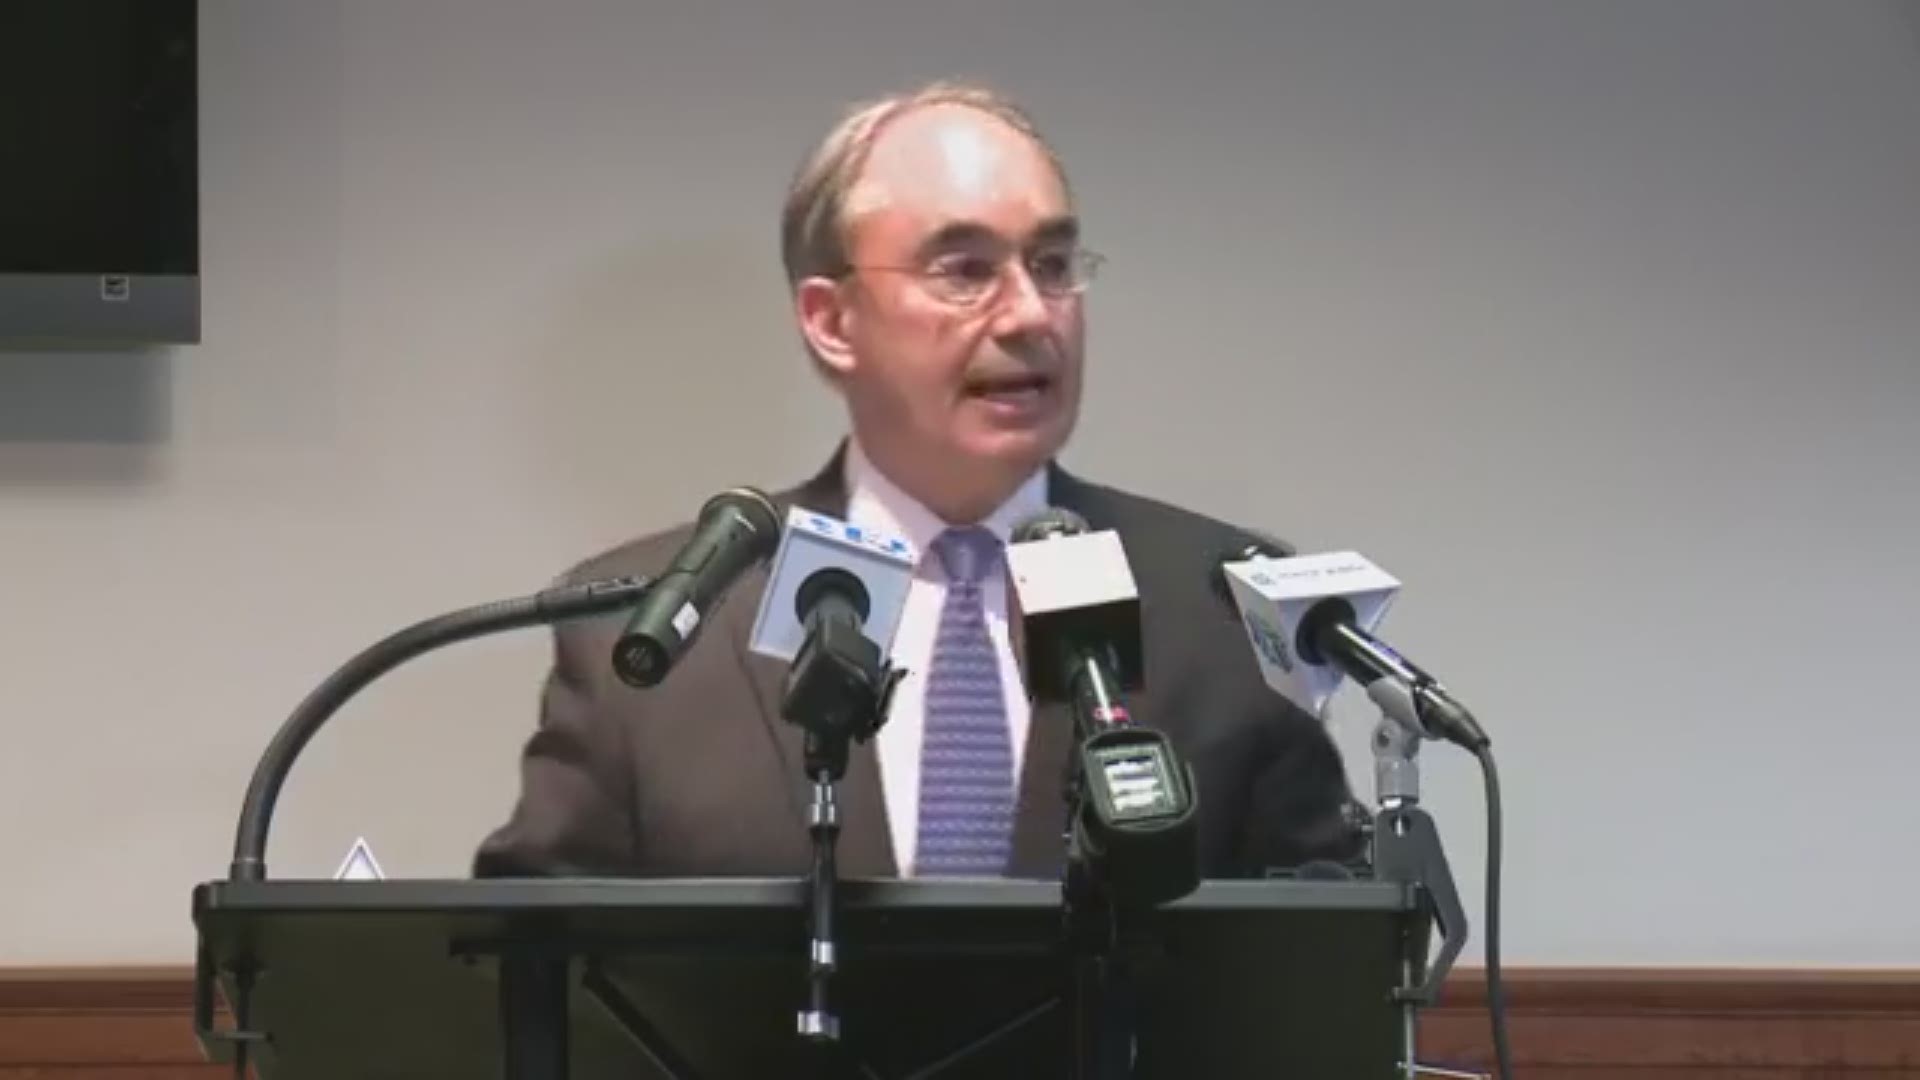 Rep. Poliquin holds press conference on lawsuit regarding ranked-choice voting